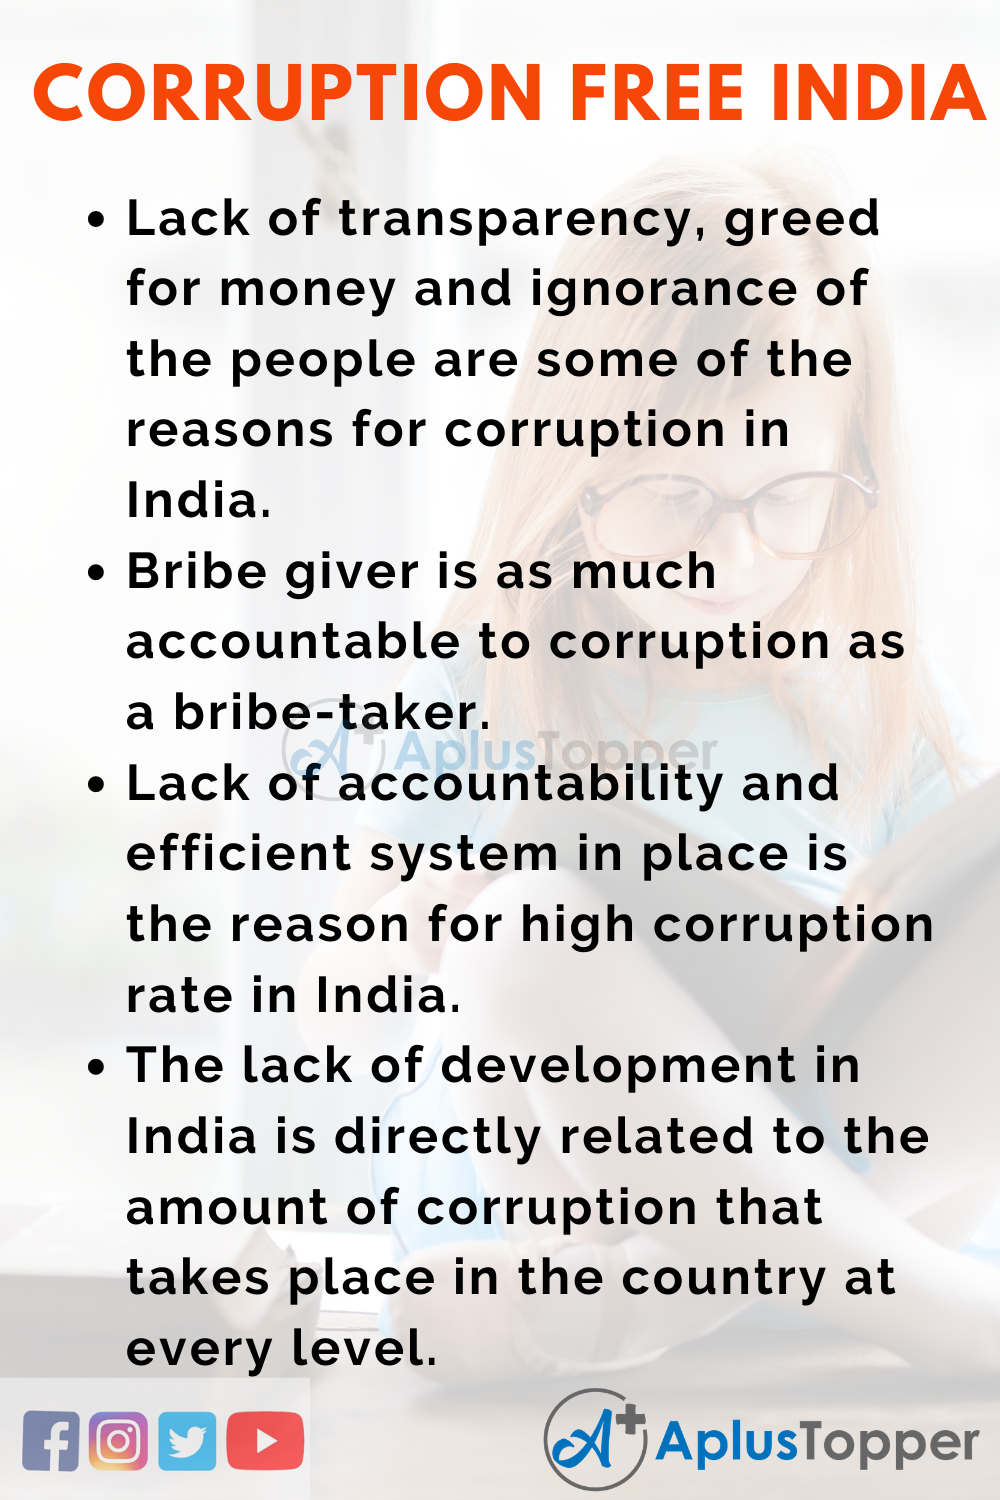 Essay About Corruption Free India